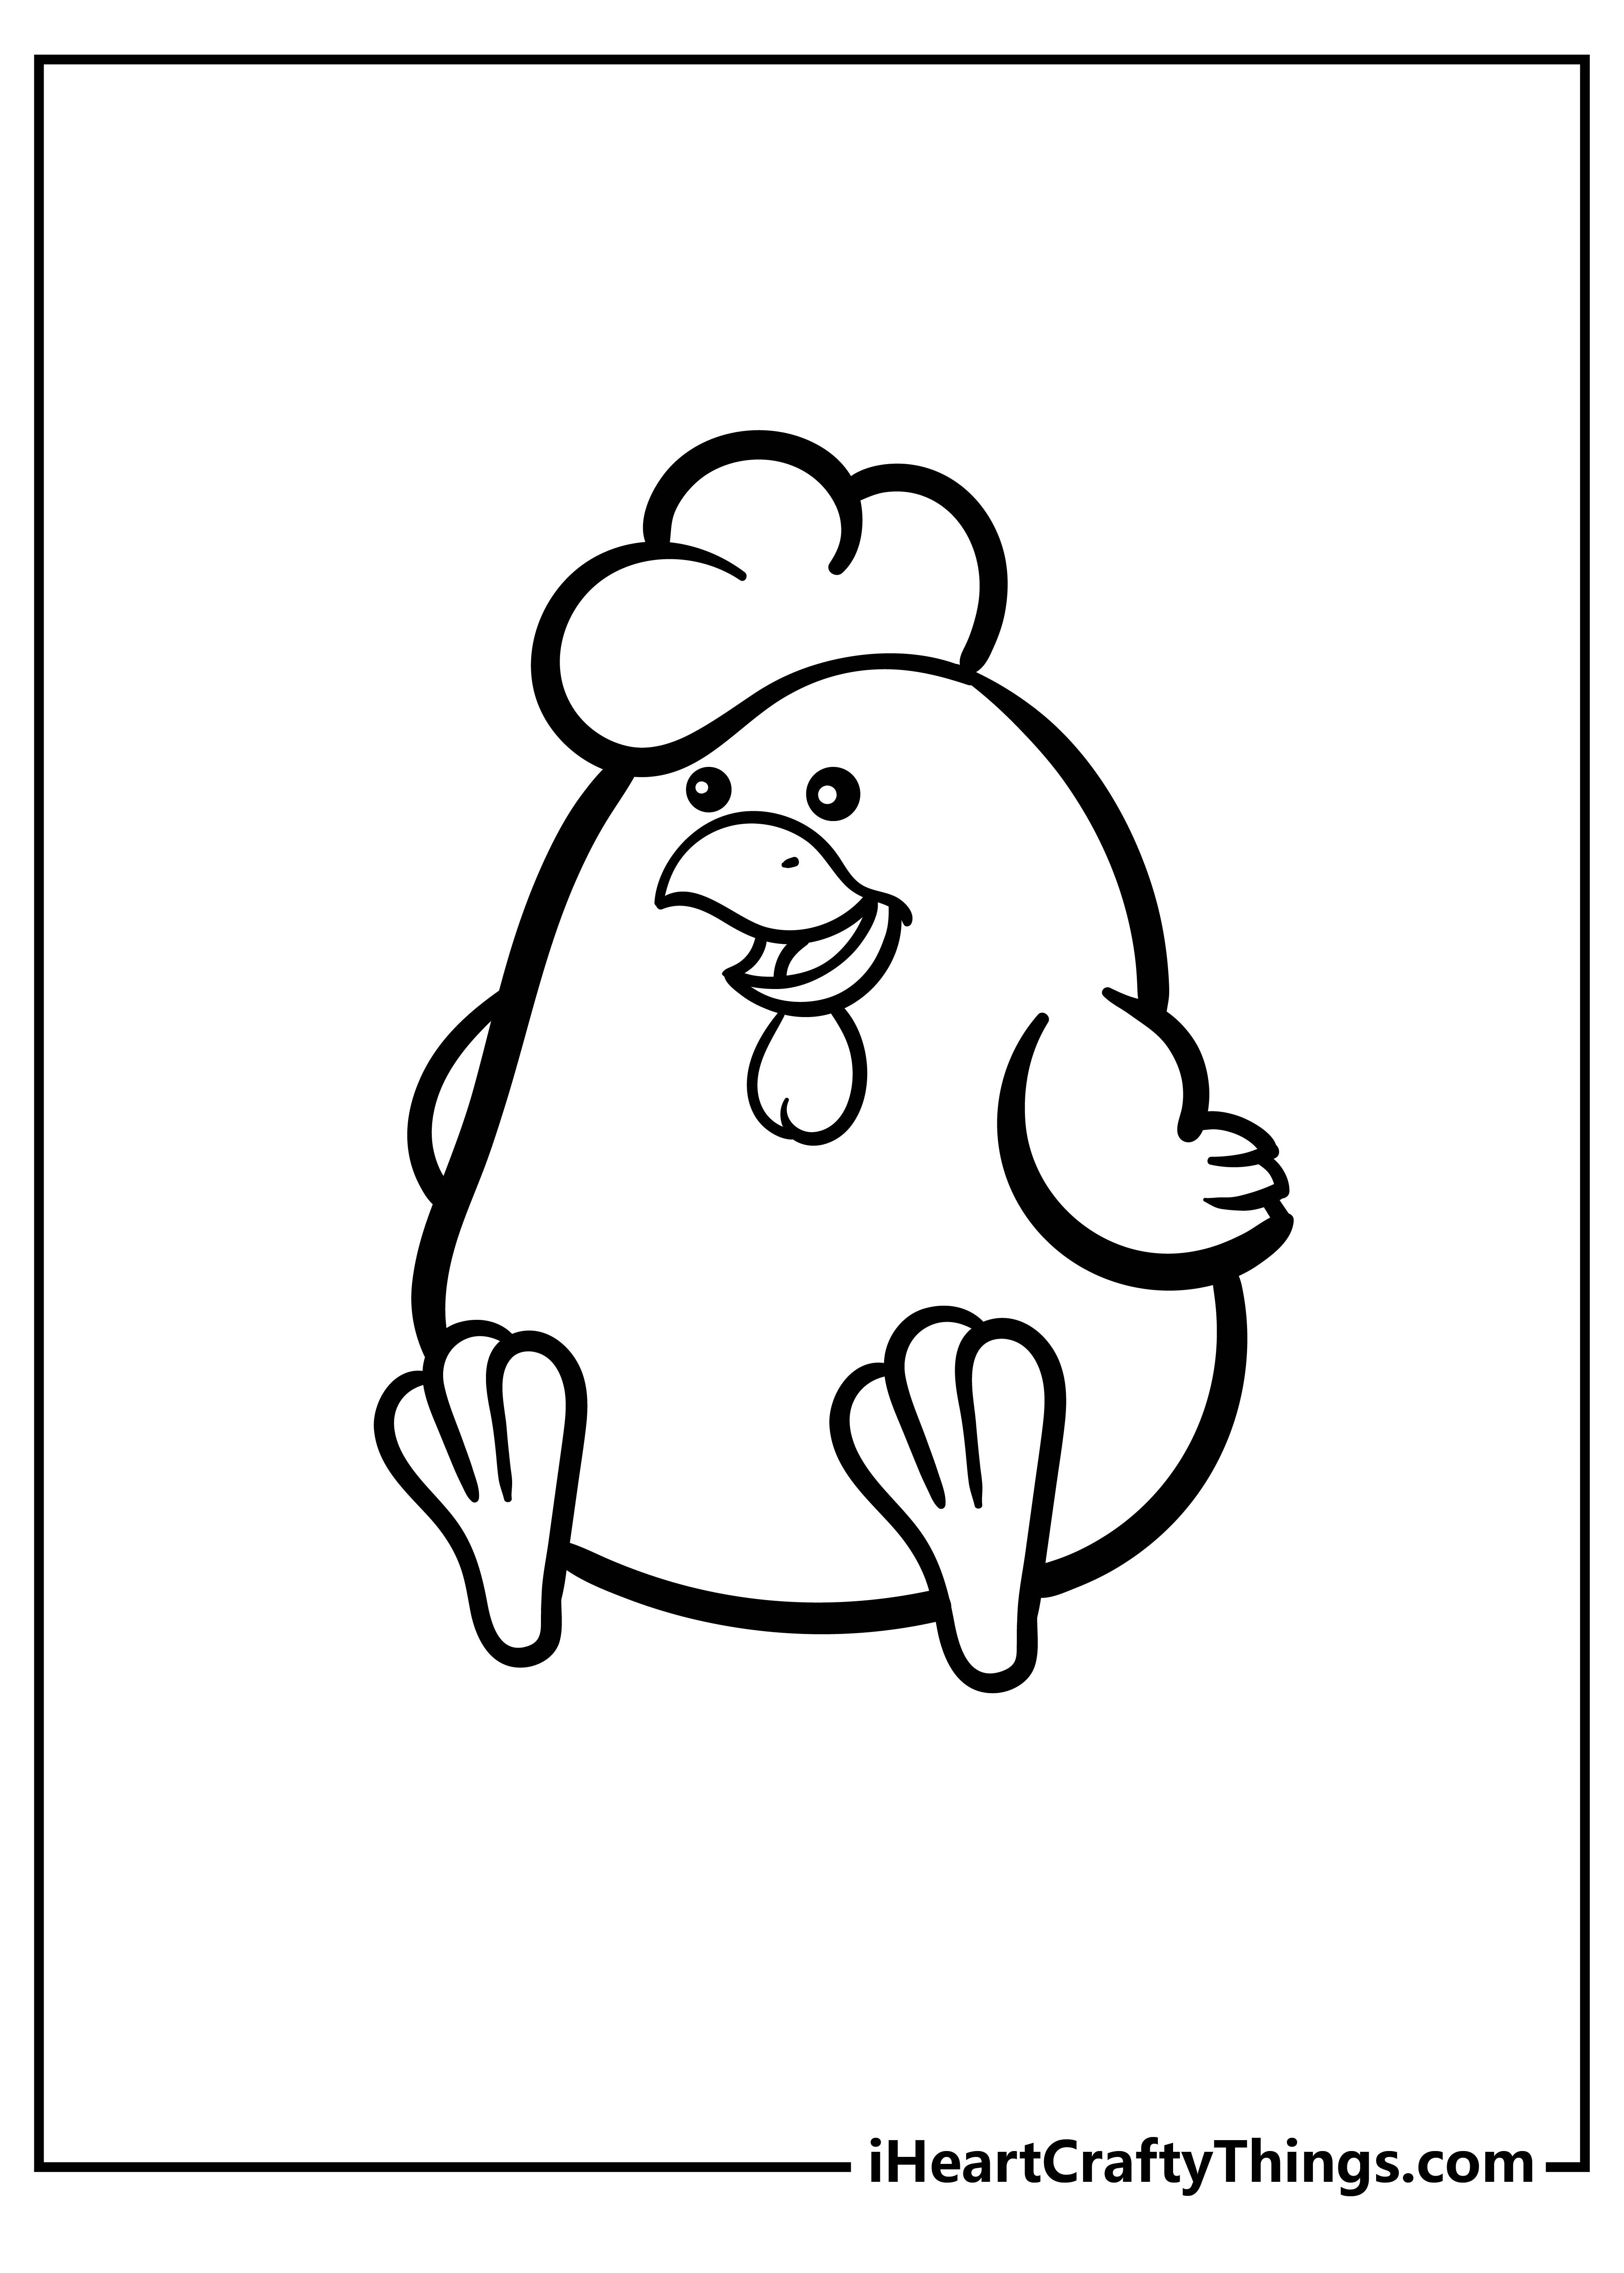 Chicken Coloring Pages for adults free printable